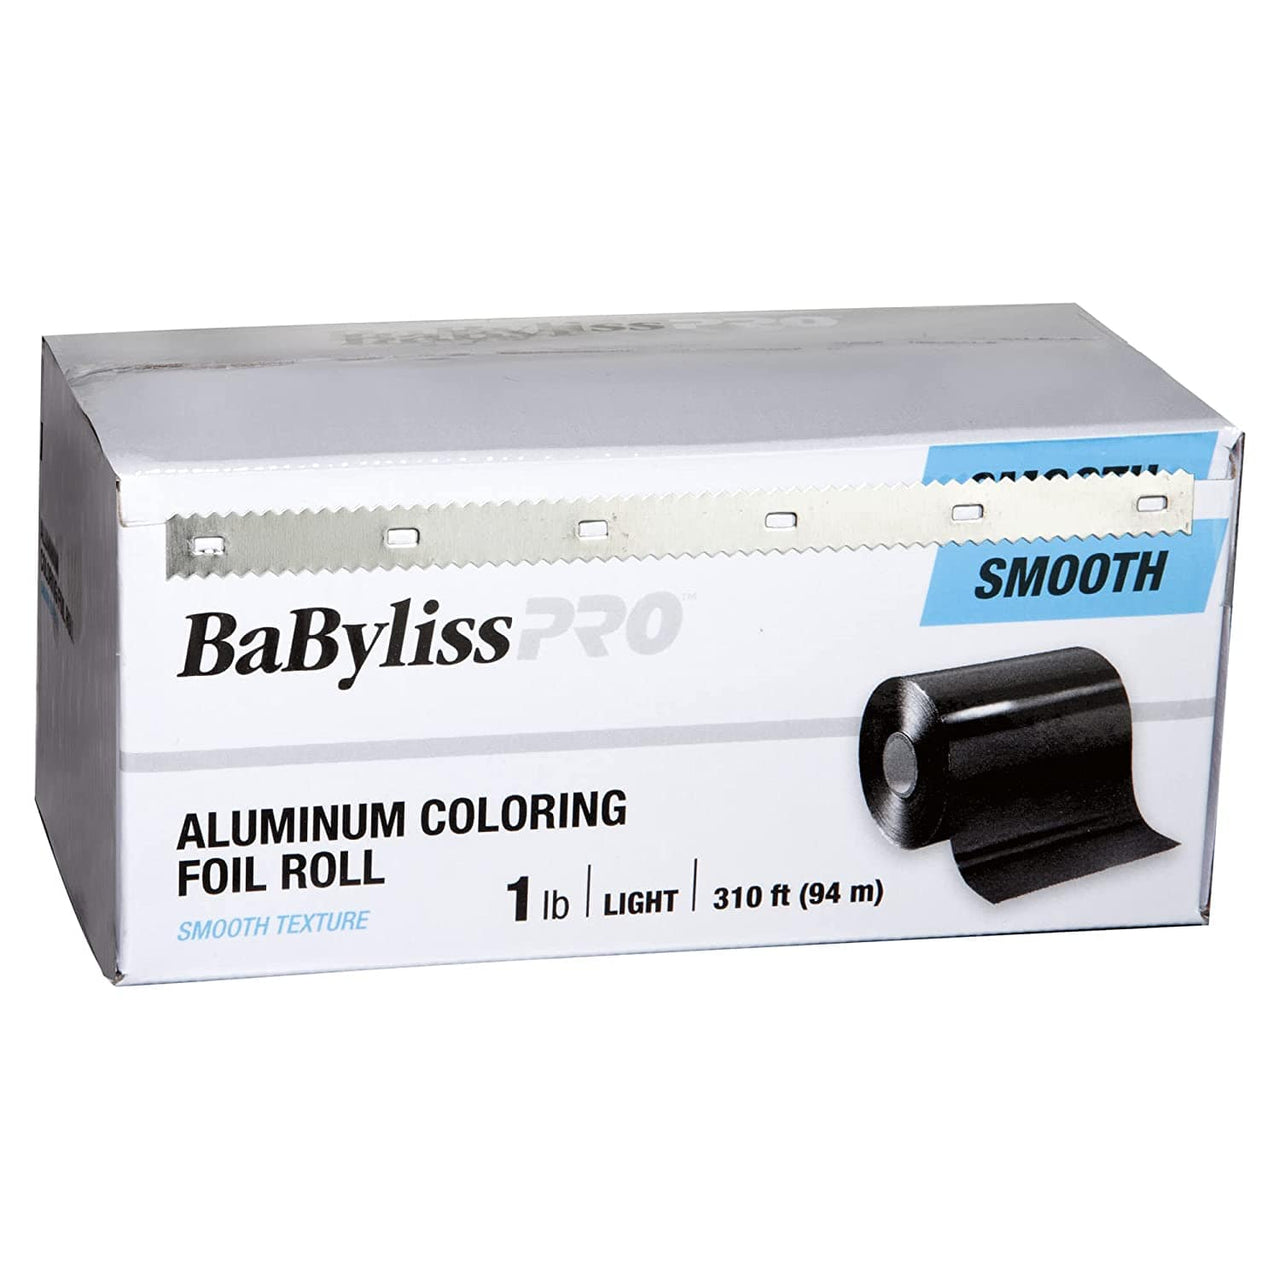 BABYLISS PRO_Aluminum Coloring Foil Roll Smooth 1 lb | Light | 310 ft_Cosmetic World